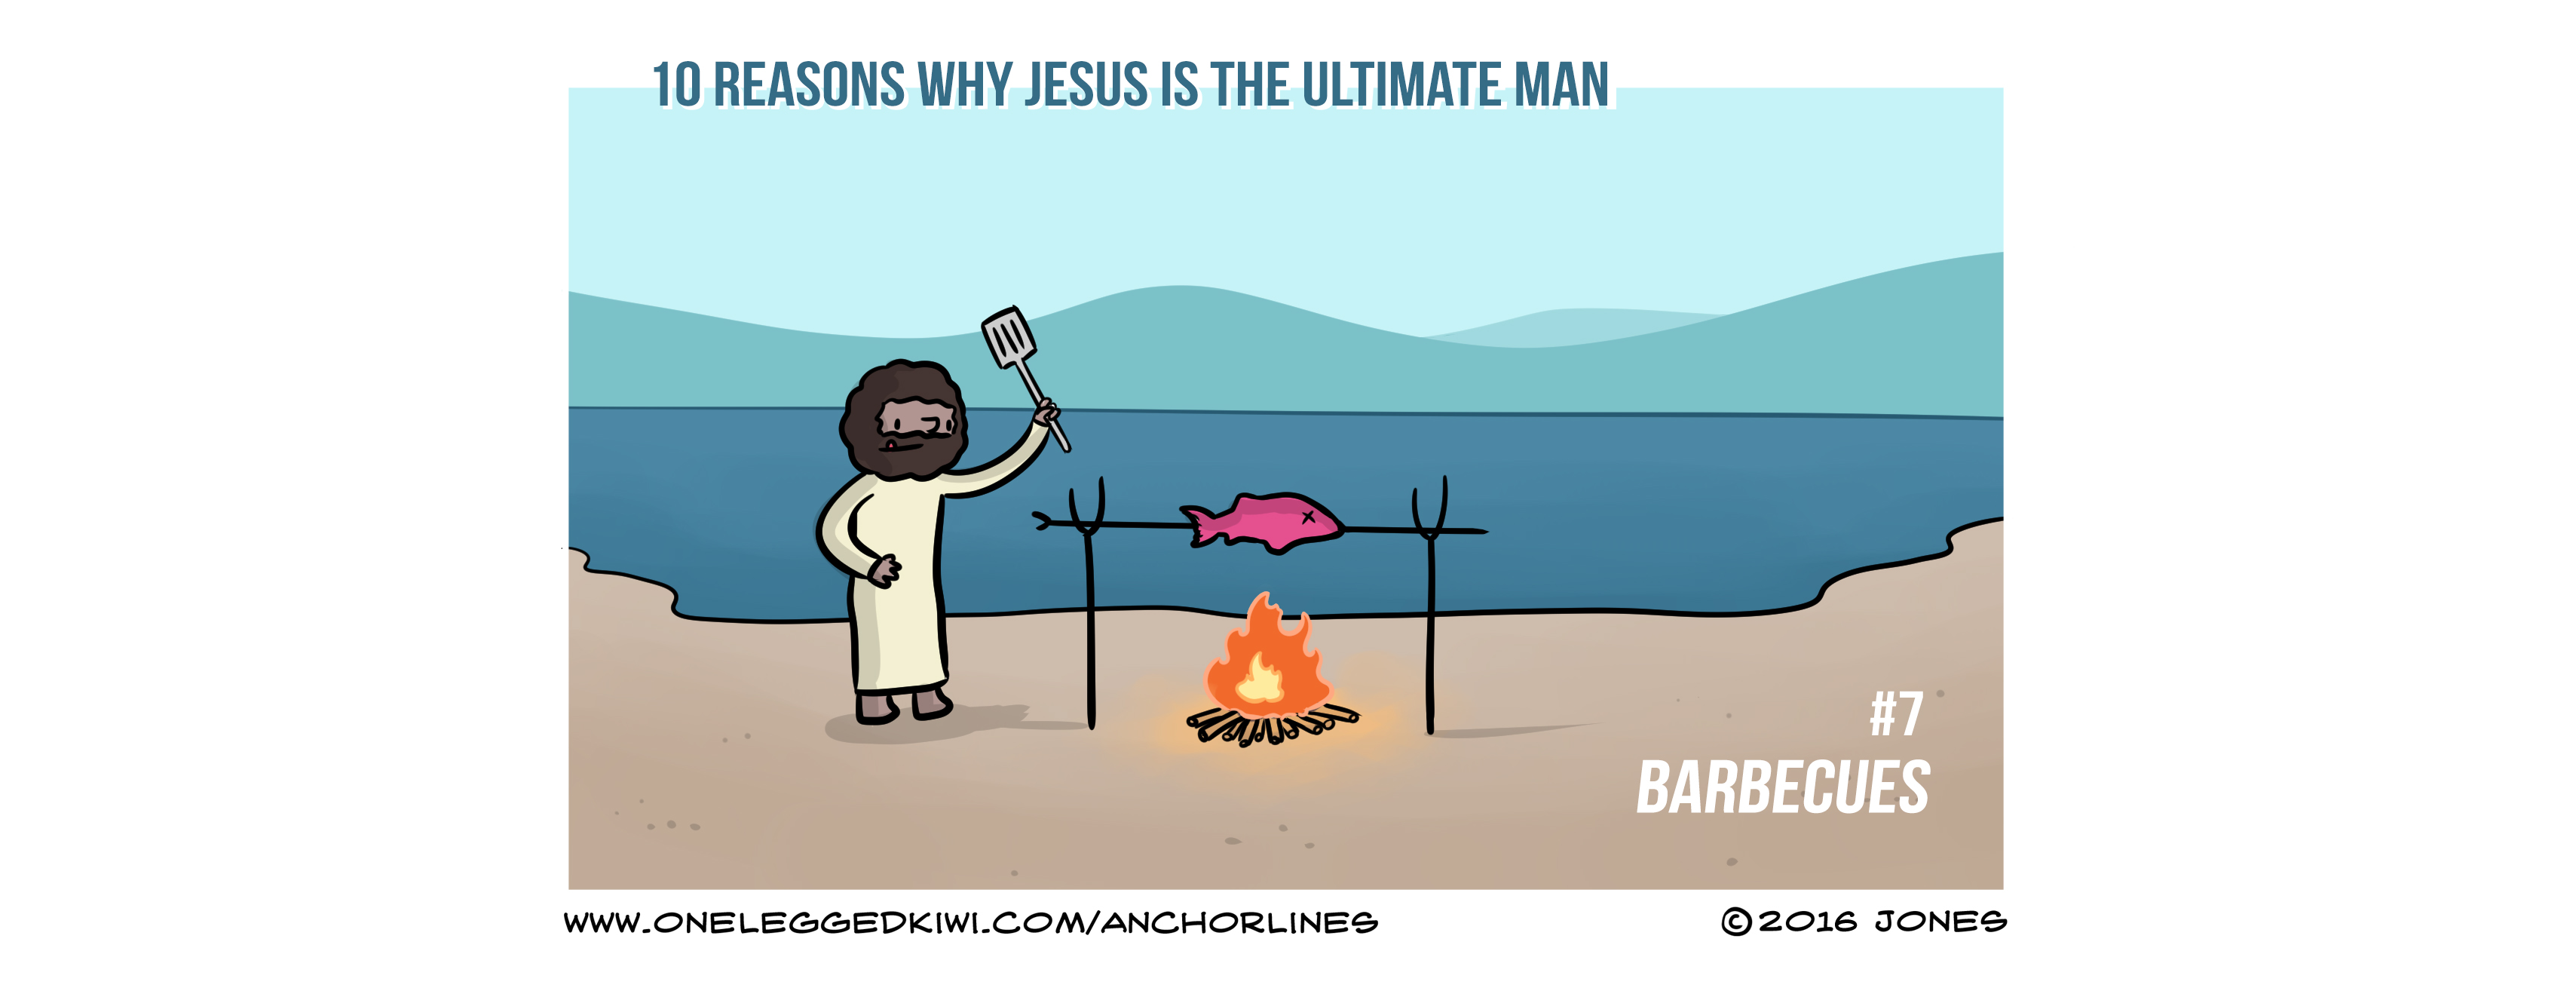 Jesus, like the maniliest of men, loved a good barbecue